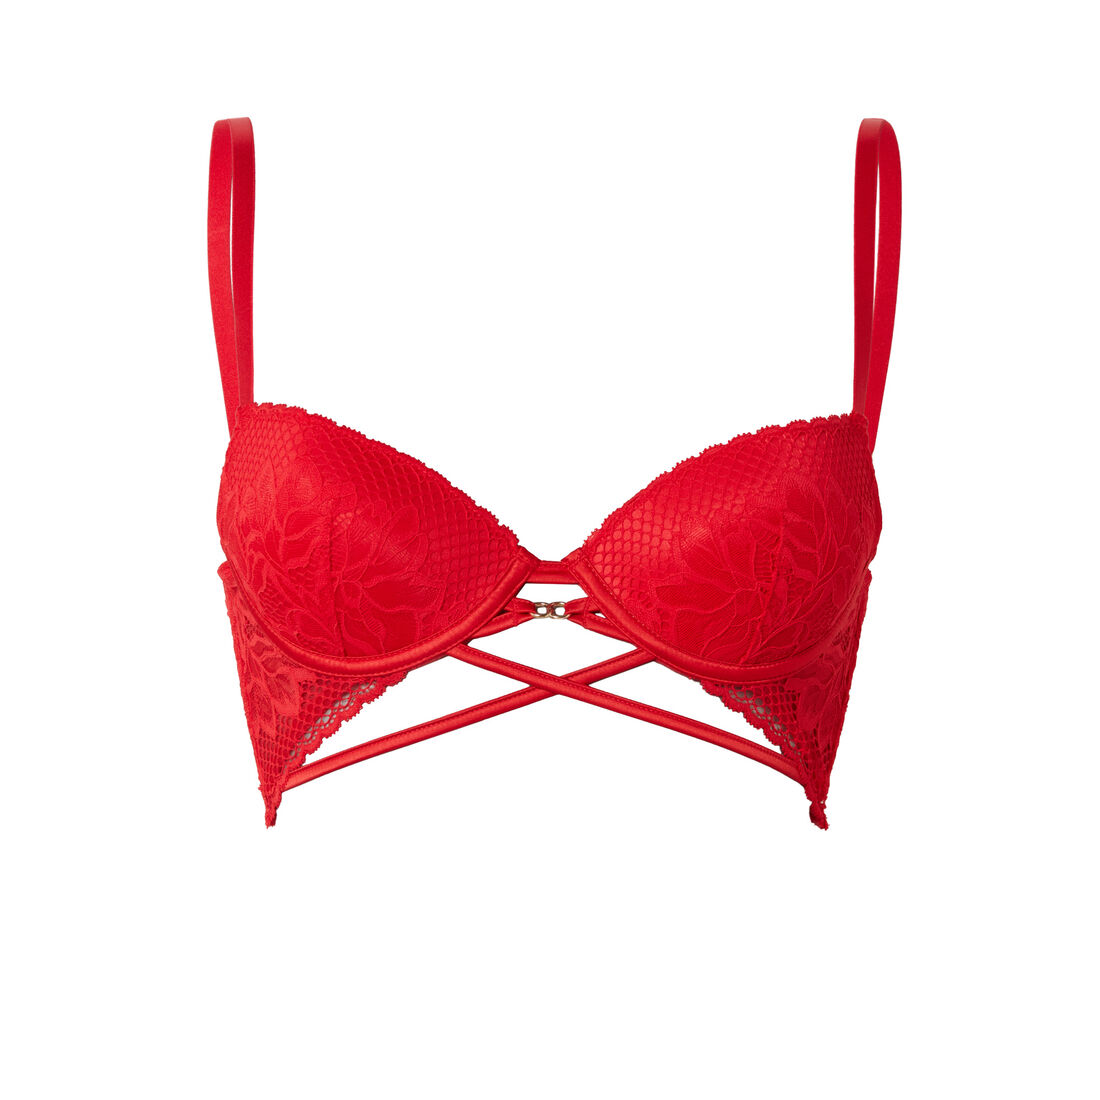 lace push-up bustier bra with ties and ring details - red;